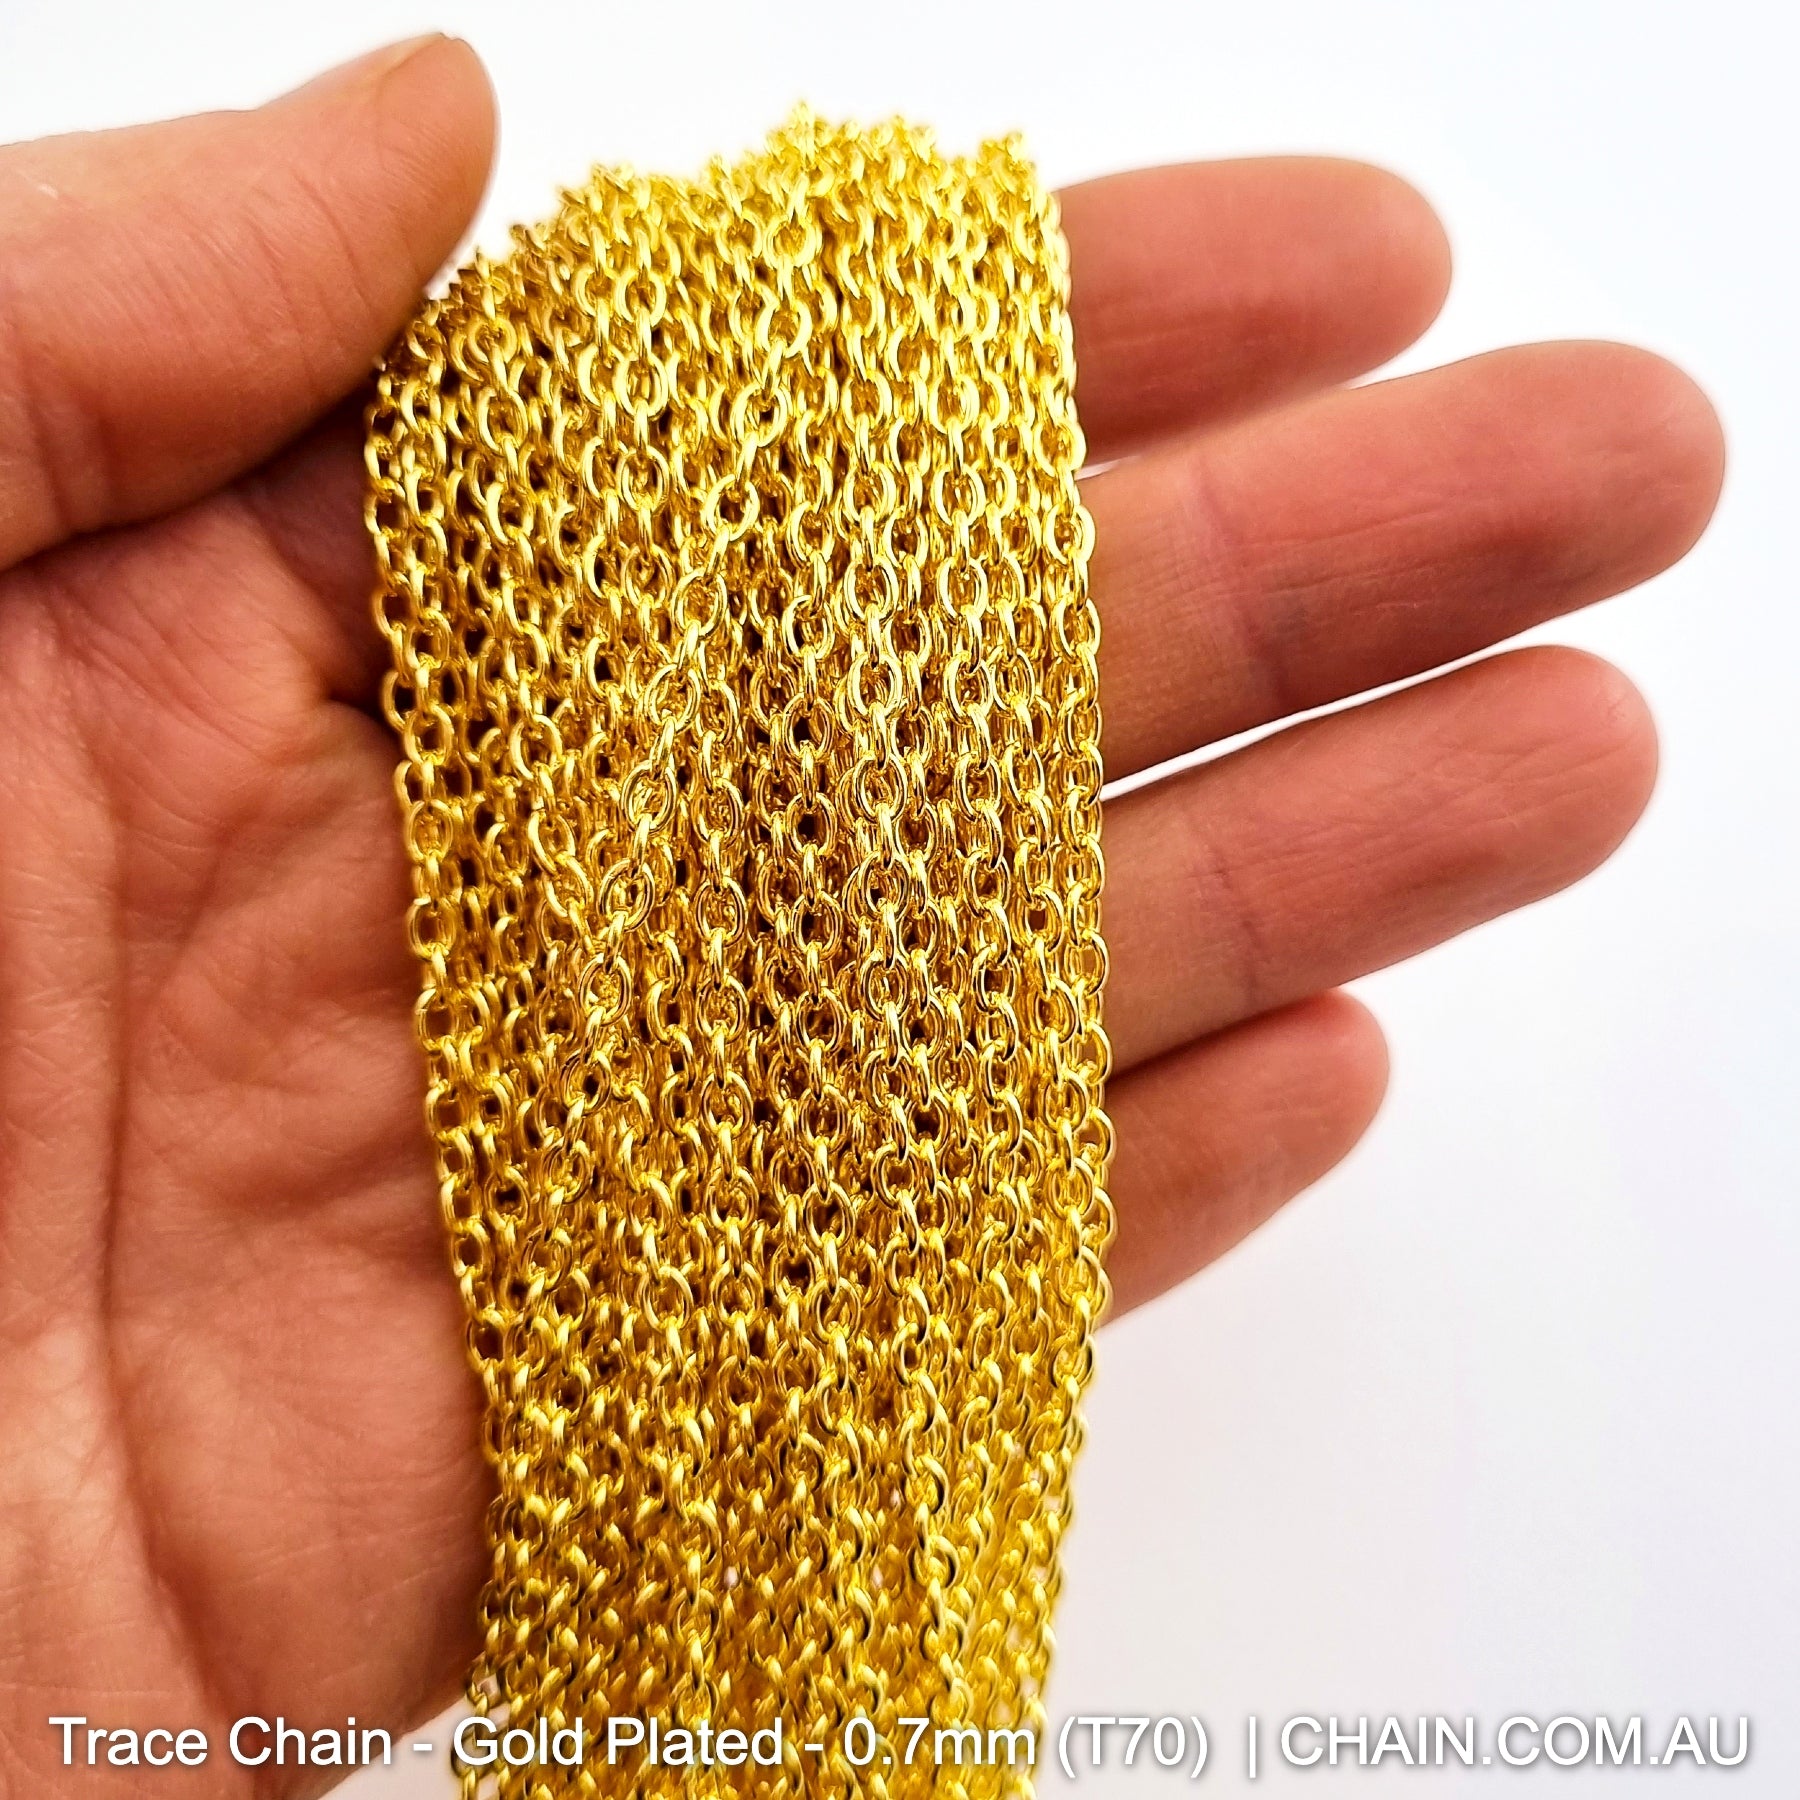 Trace Chain in a Gold Plated Finish. Size: 0.7mm, T70. Jewellery Chain, Australia wide shipping. Shop chain.com.au